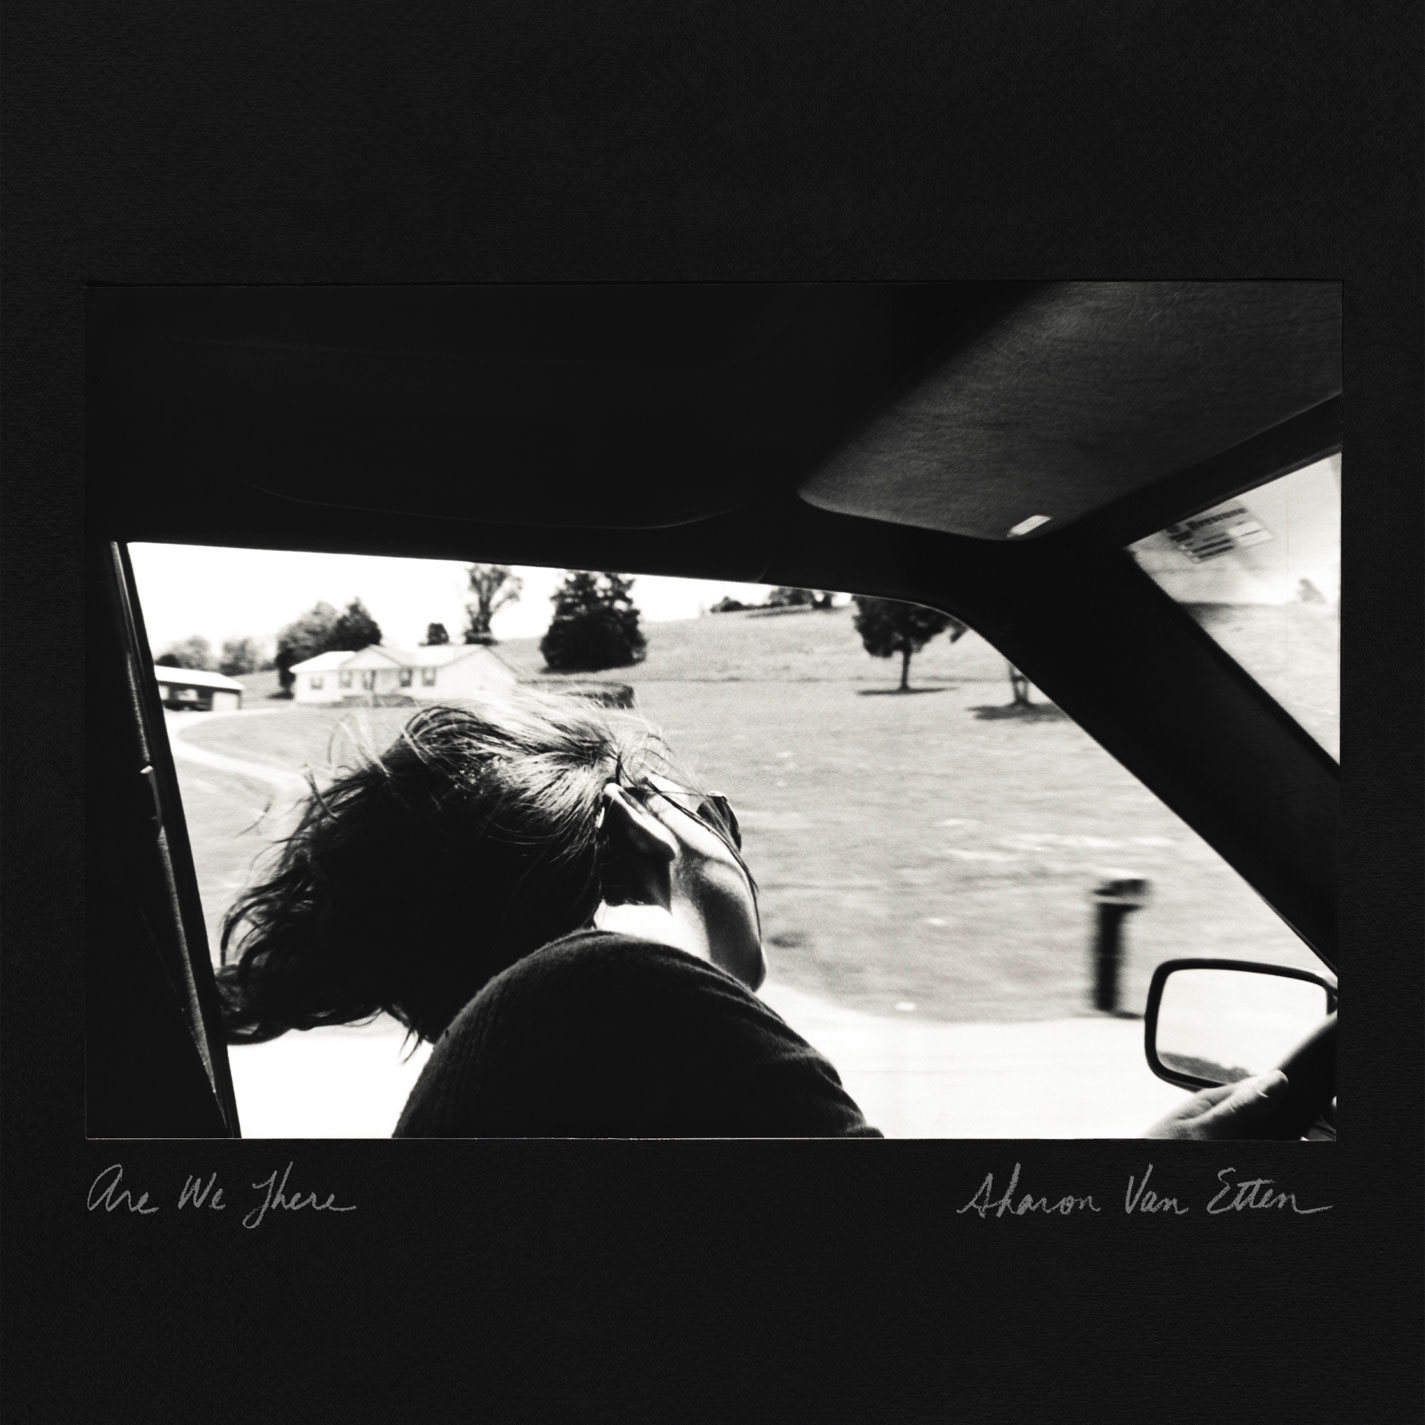 Sharon Van Etten's new album, Are We There, is out now.